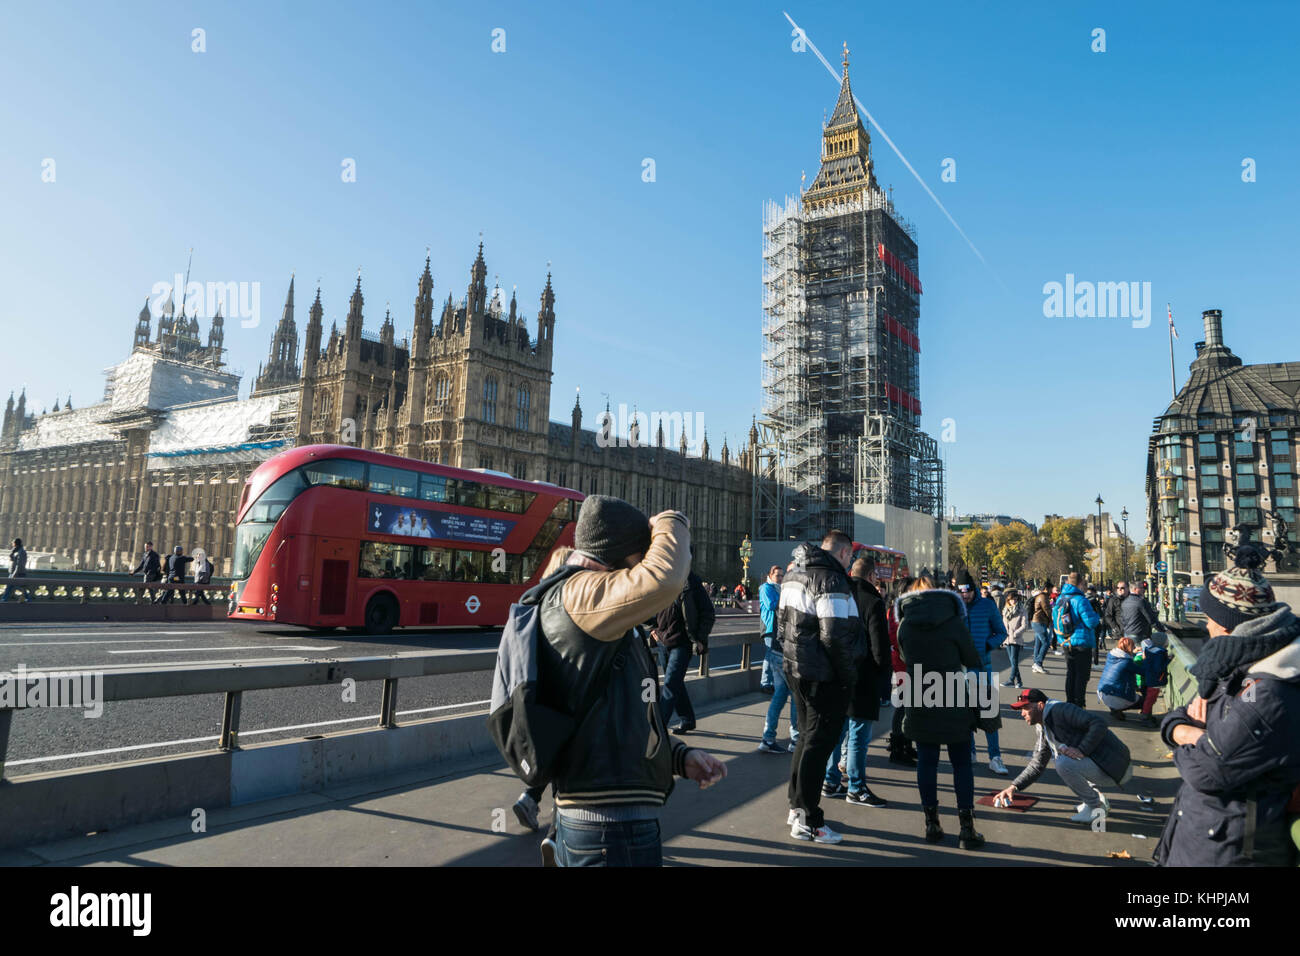 LONDON, UK - October 17th, 2017: Westminster bridge and big ben renovation scaffolding construction with the house of parliament in view, sunny day, clear sky. Stock Photo